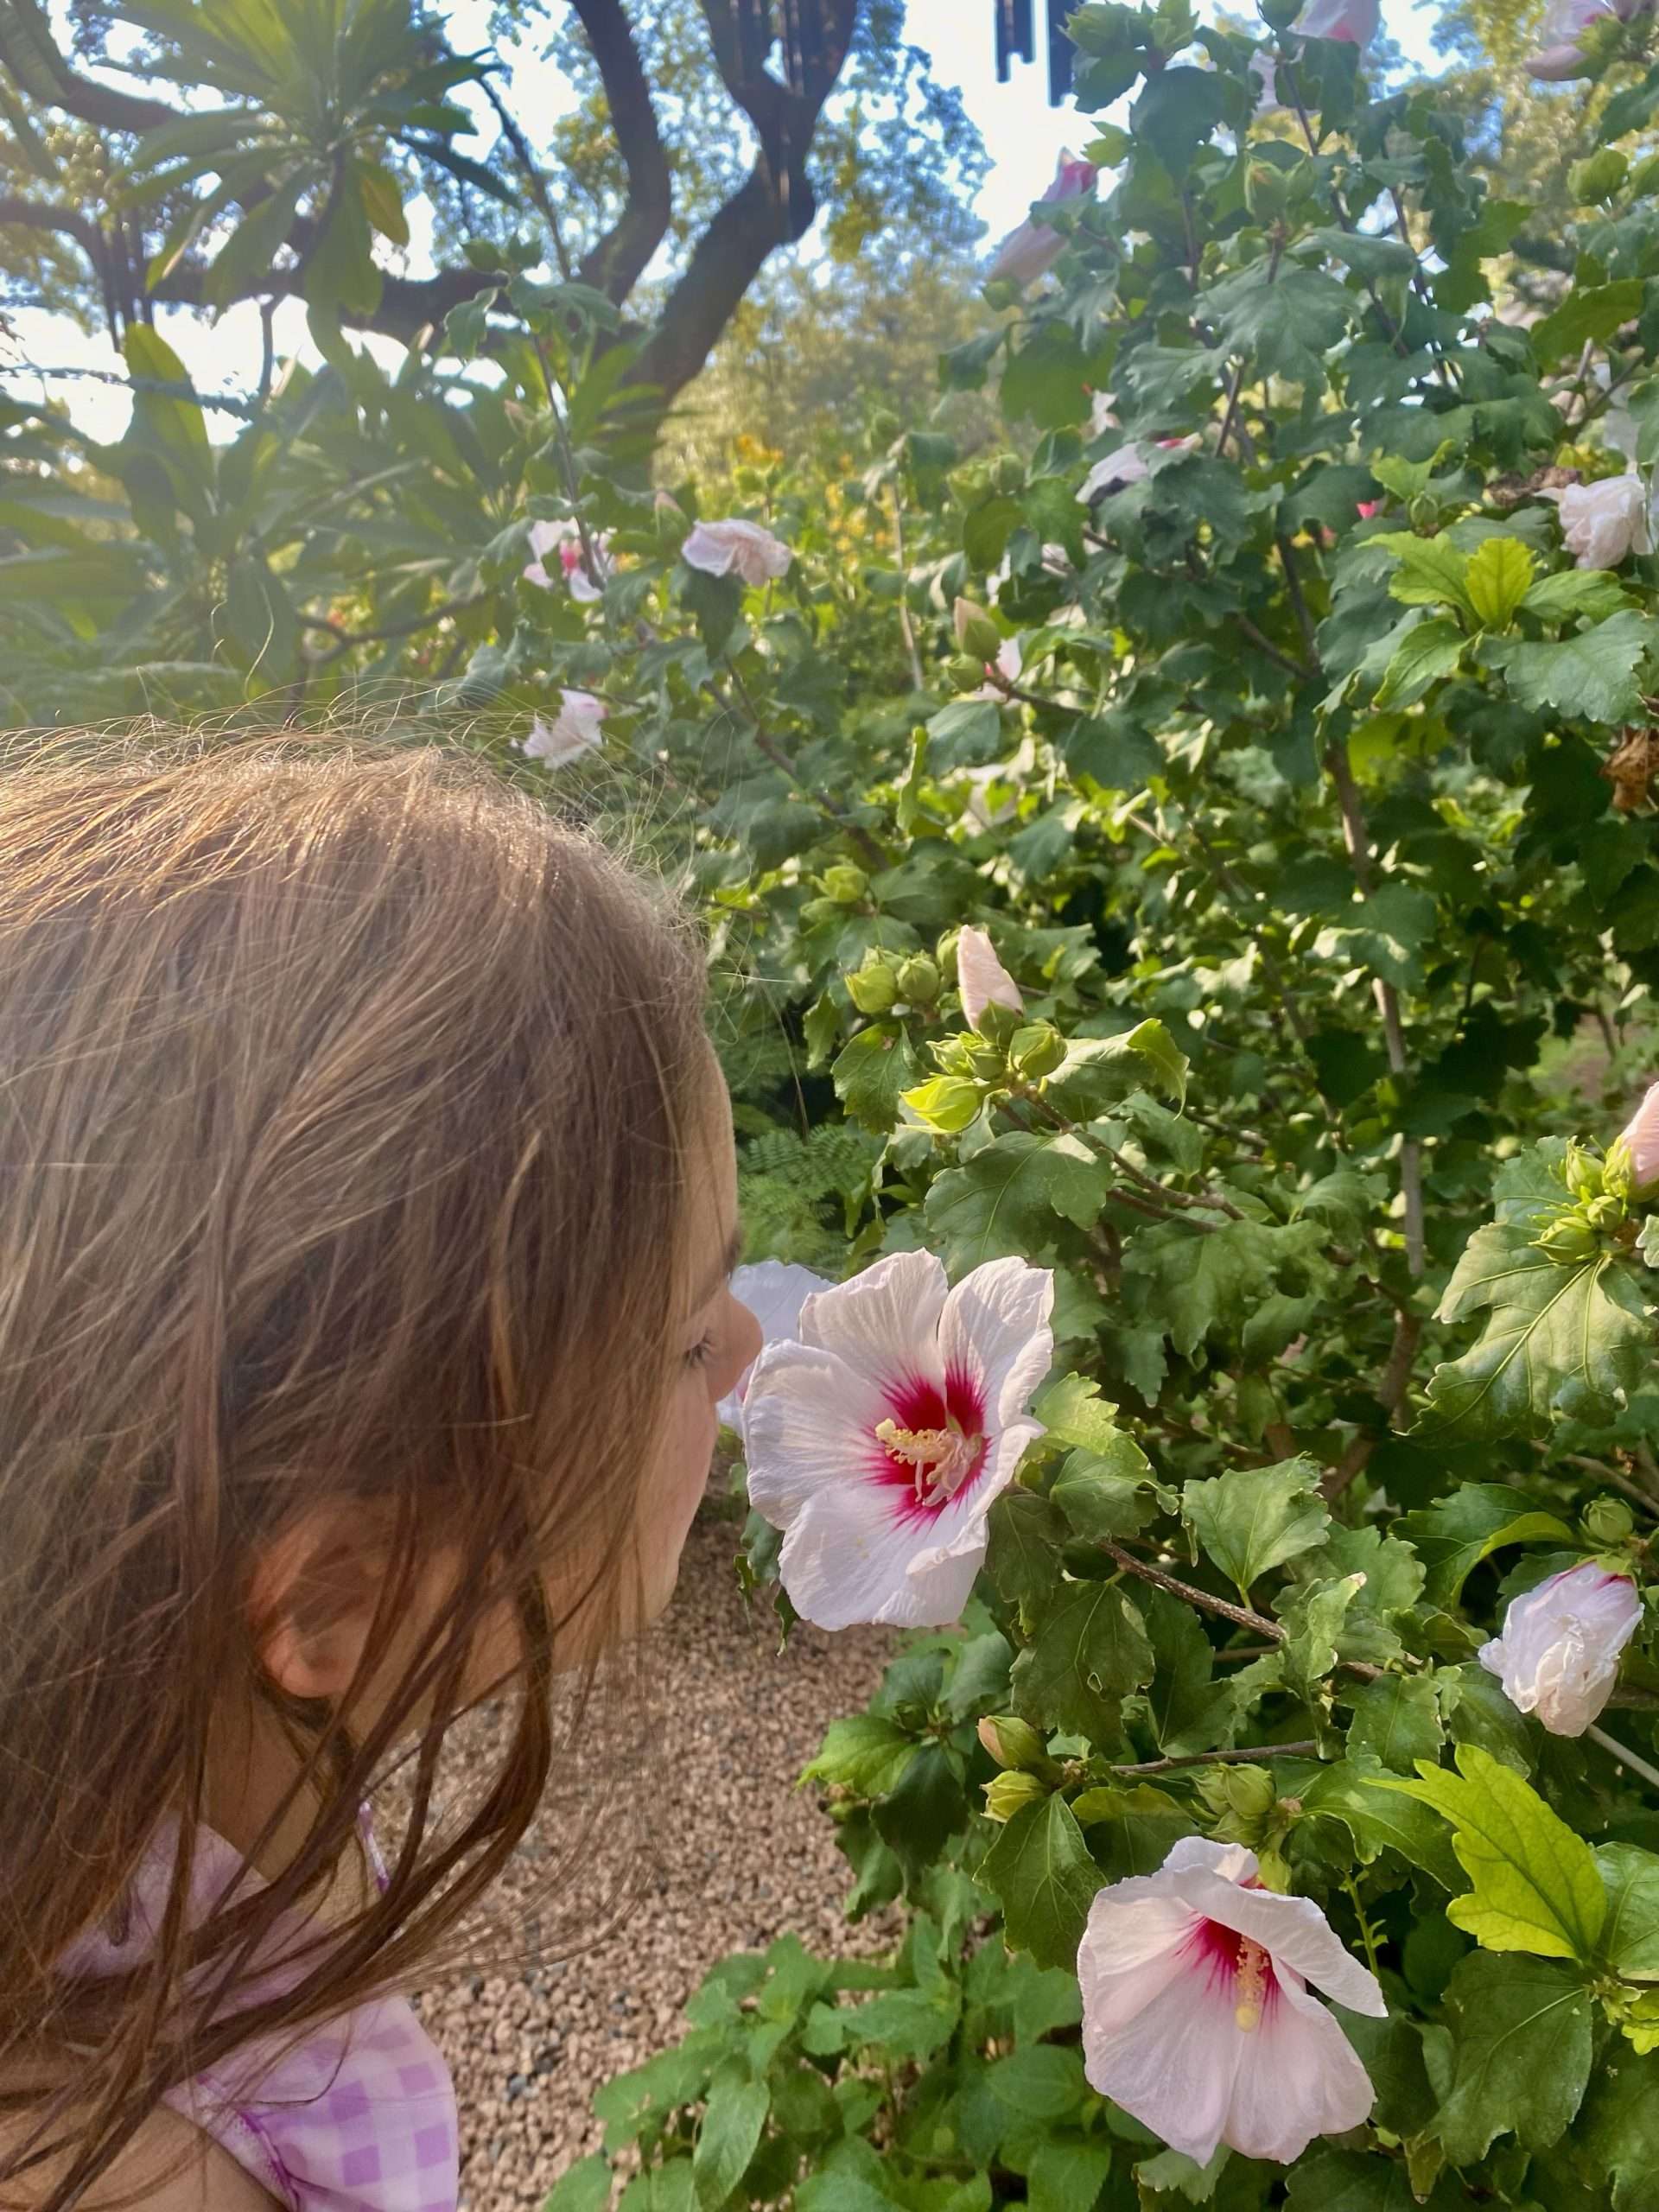 Stopping to smell the flowers in the Butterfly Gardens at Krause Springs.